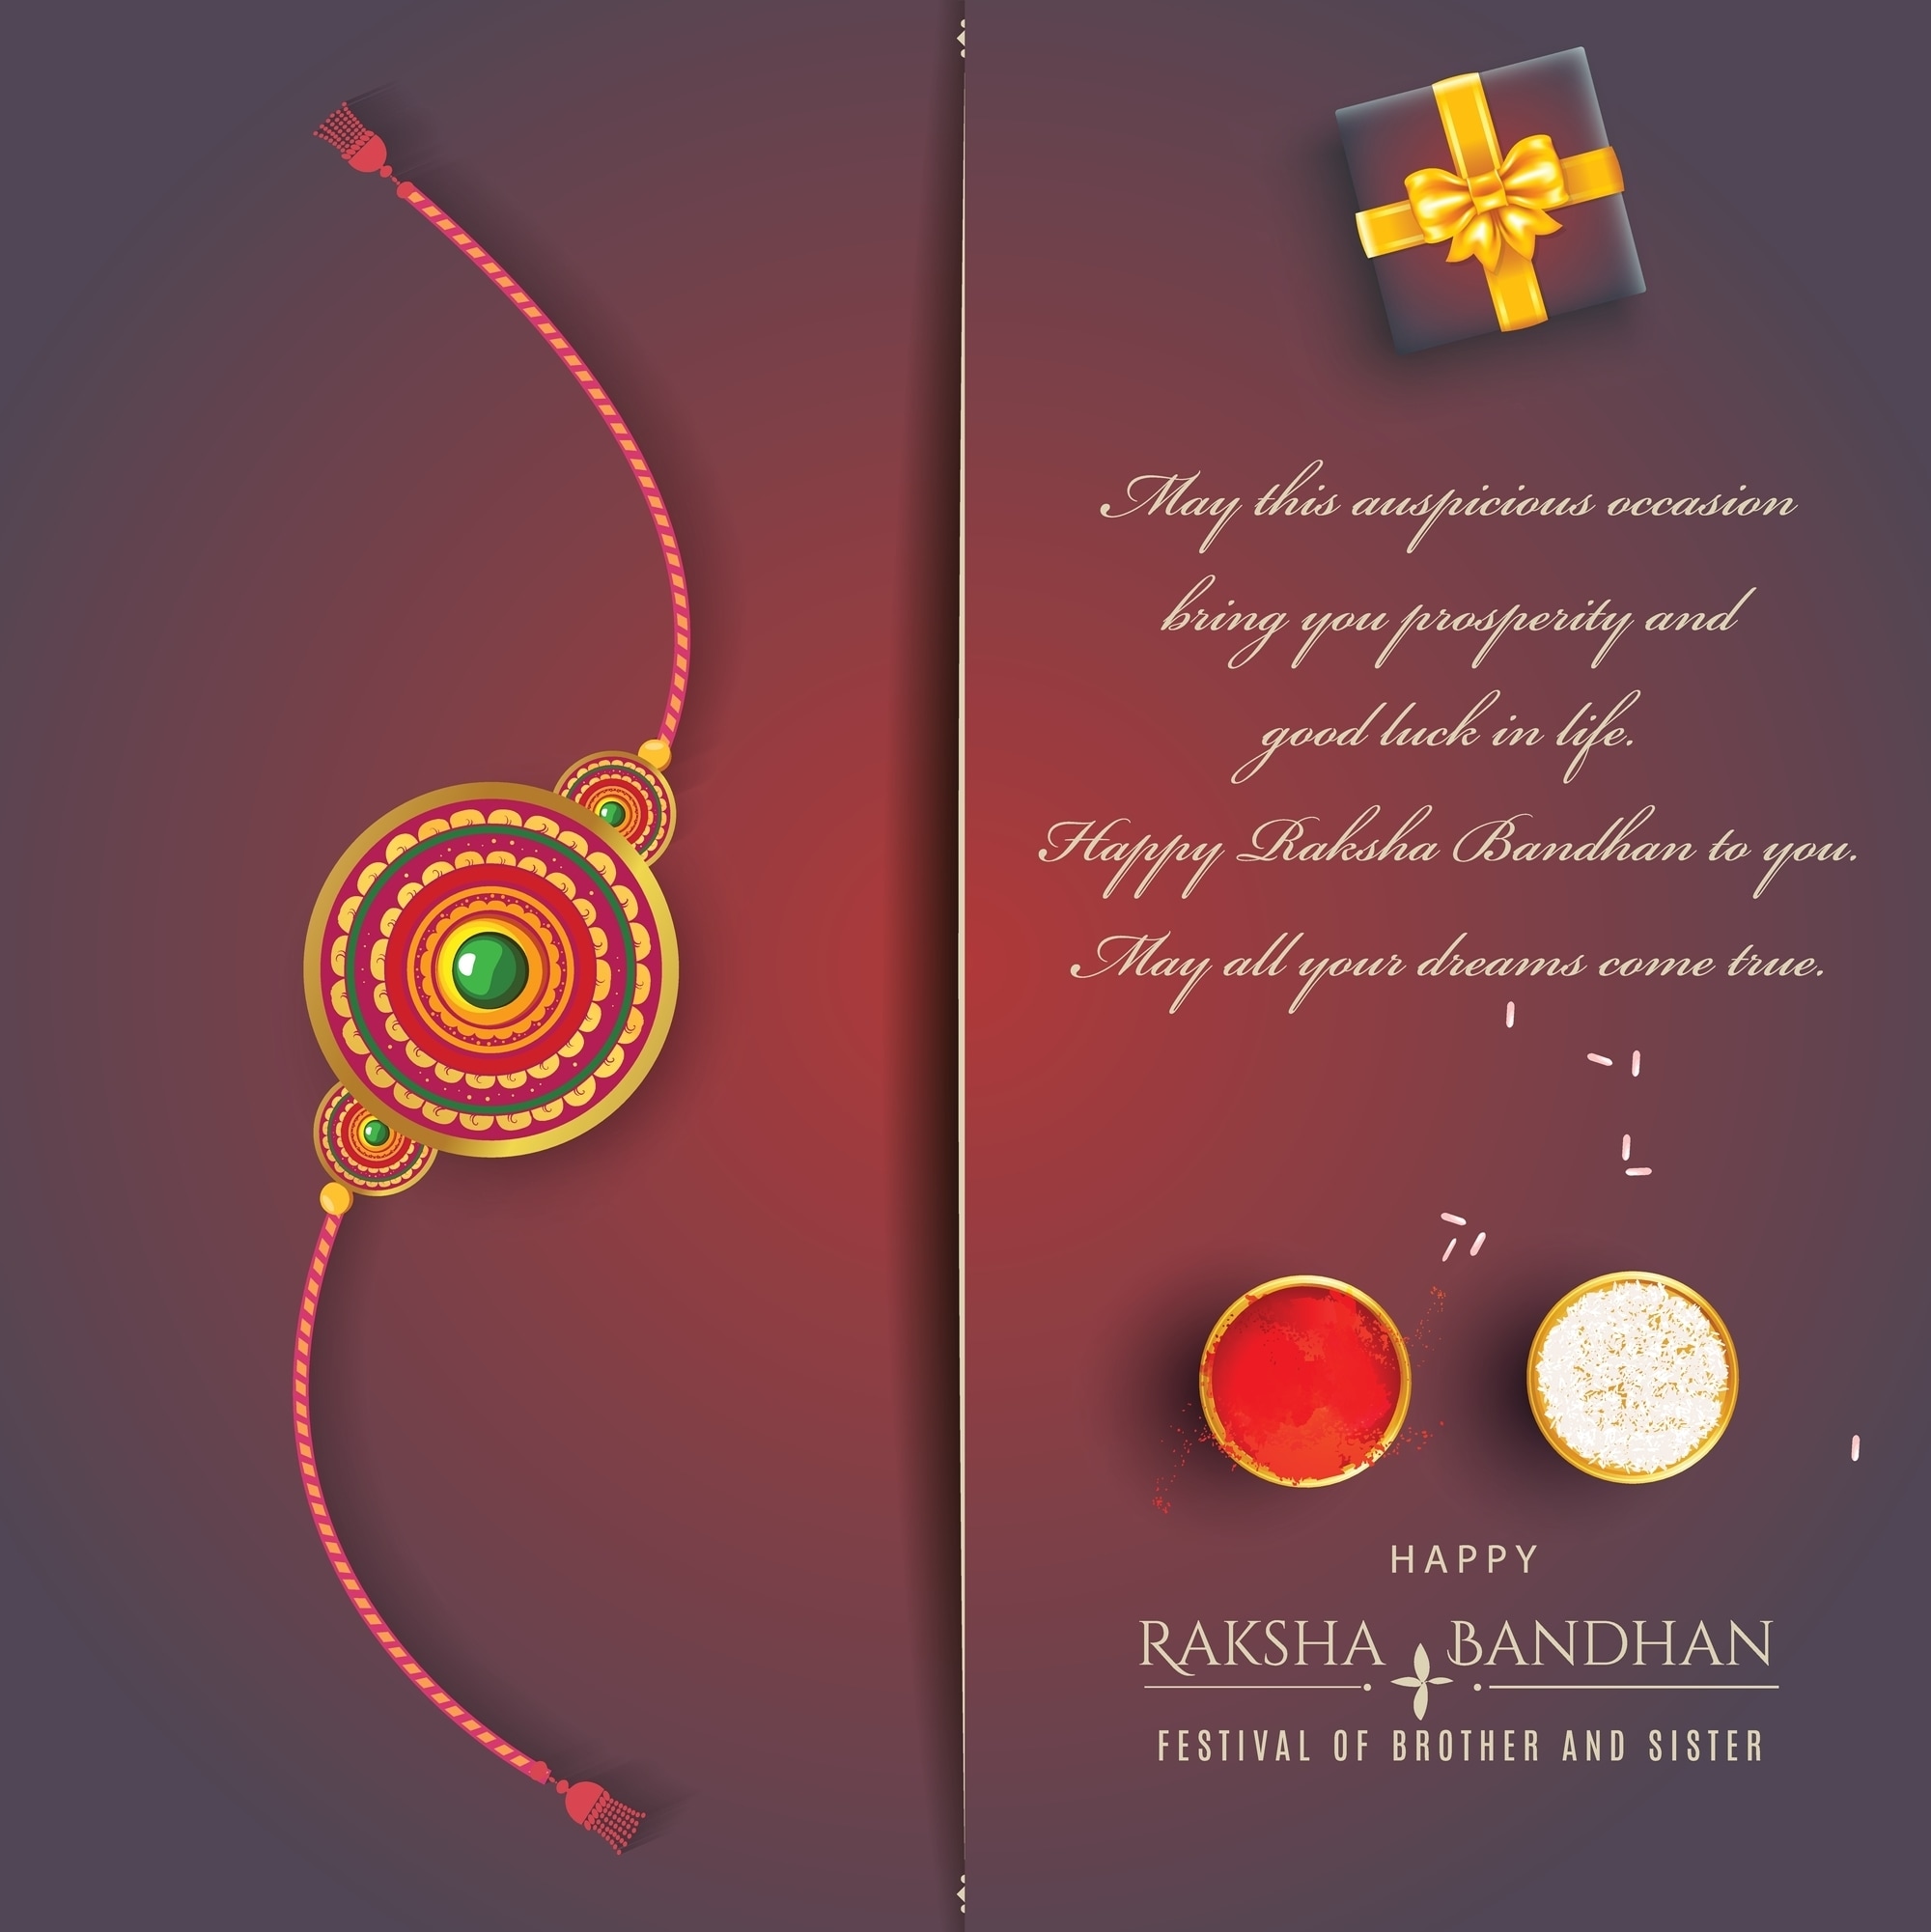 Free Download Raksha Bandhan HD Images, Wallpapers, Greeting Cards, Photos,  Pictures 2014 – BMS | Bachelor of Management Studies Unofficial Portal